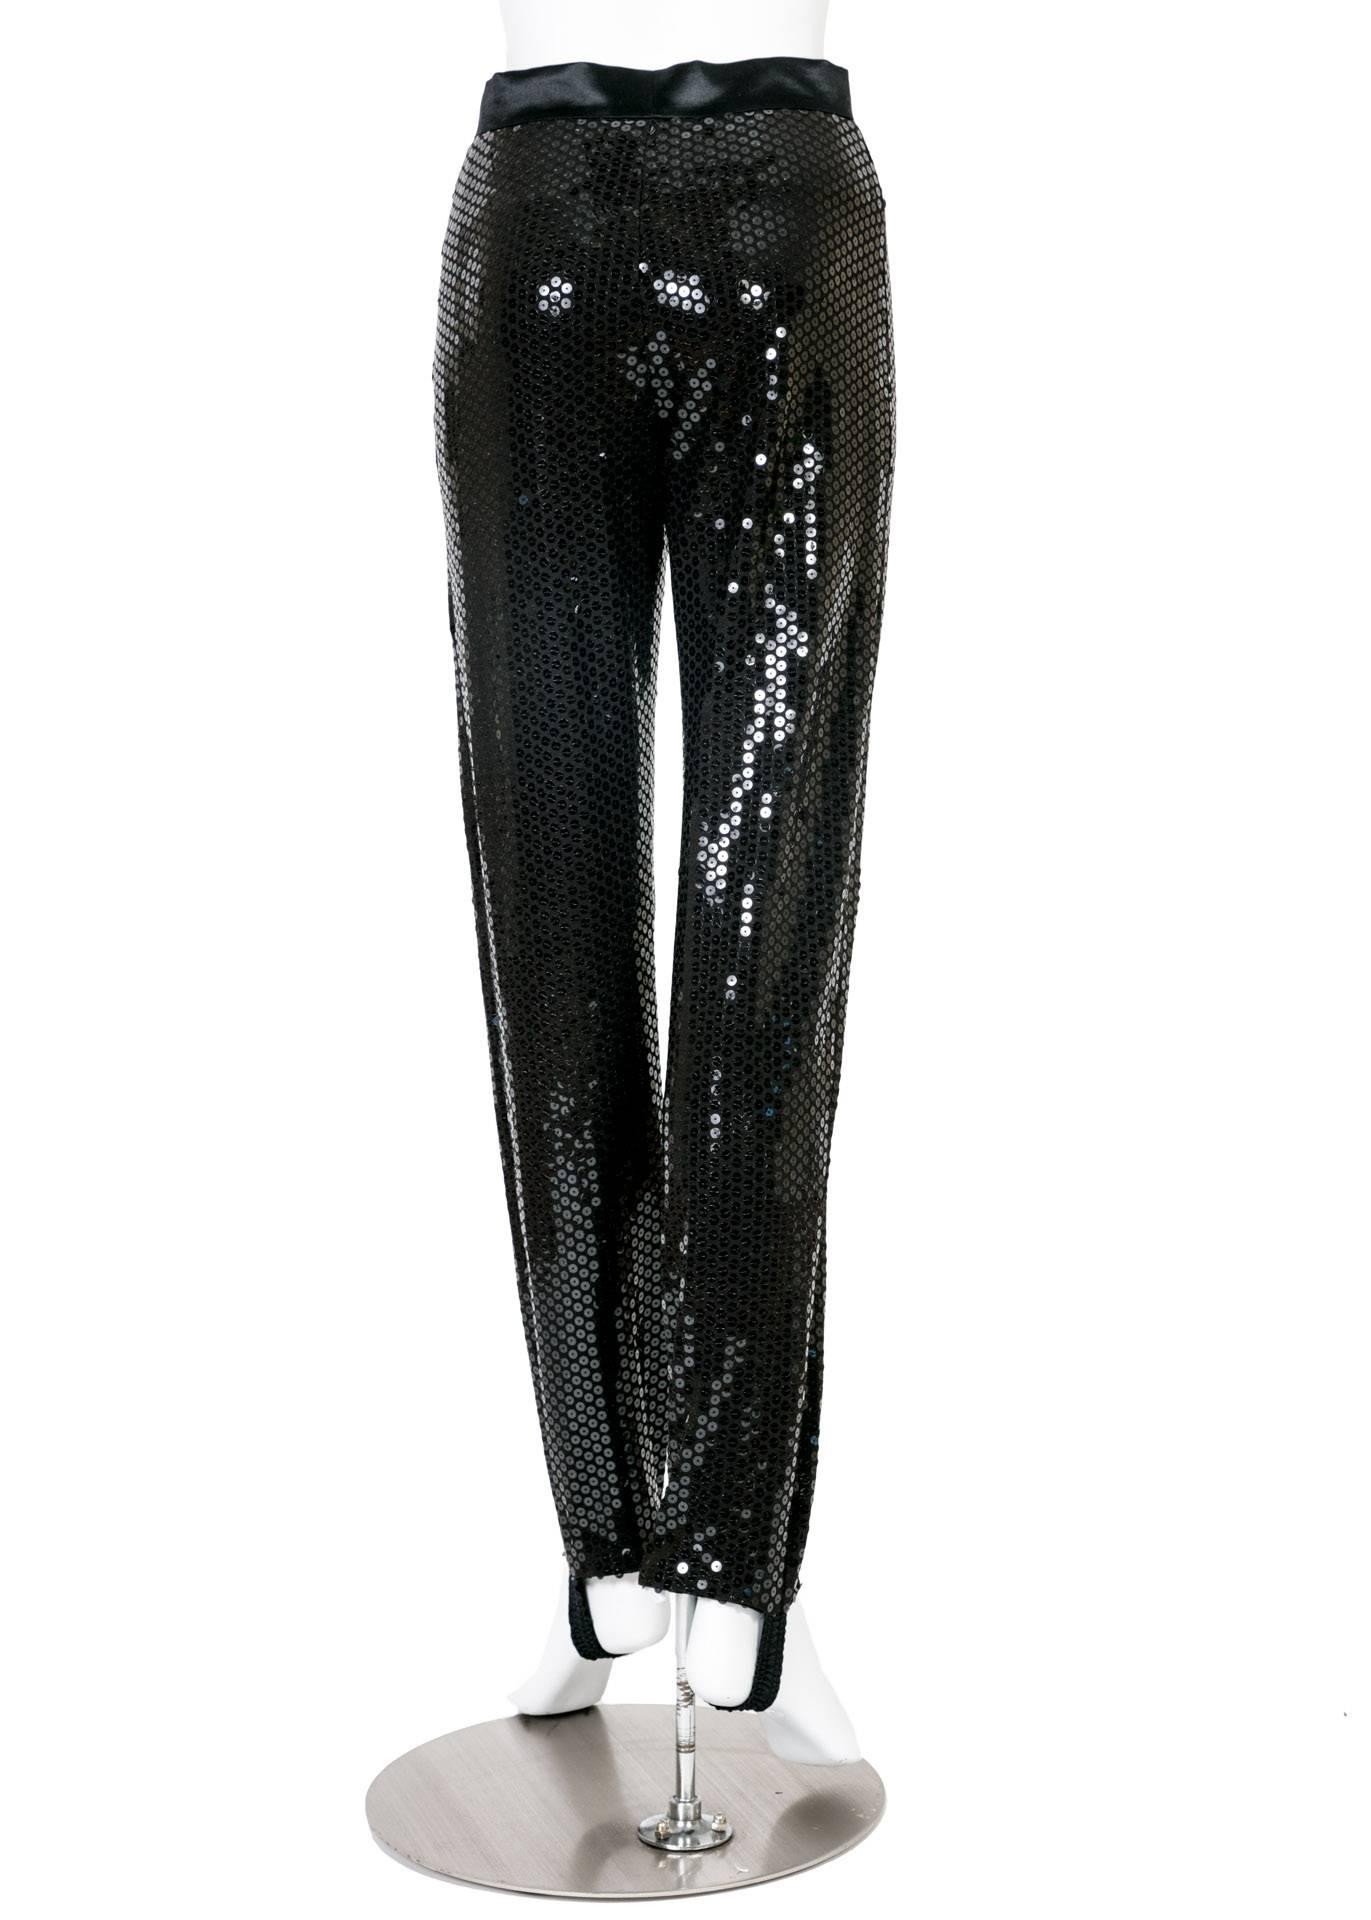 The return of the stirrup pant all over the European runways has put the style back in the spotlight, making this pair designed by Escada in the Eighties an amazing vintage find. Covered in rows and rows of black sequins, the black silk satin